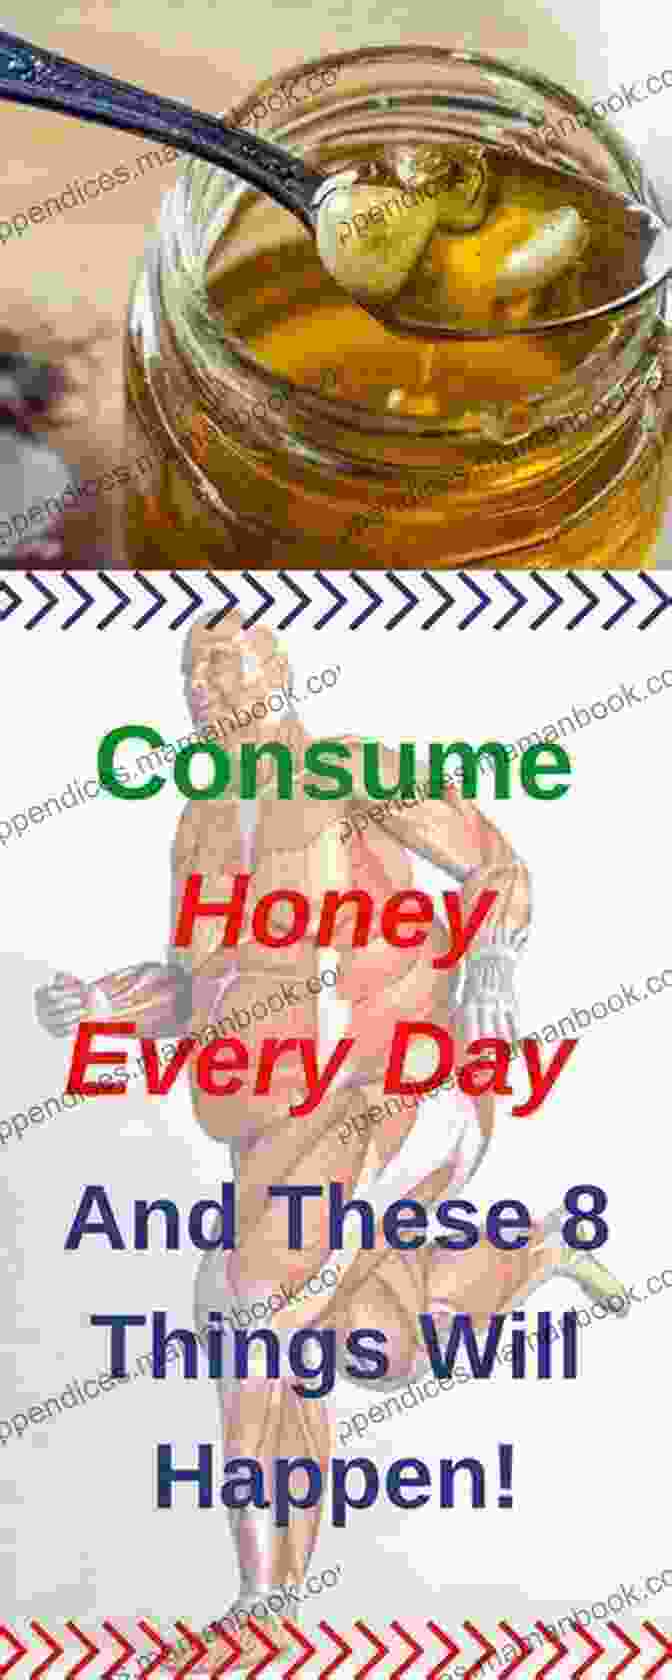 Honey Being Consumed As A Natural Sleep Aid 34 Uses For Honey (Natural Health 1)